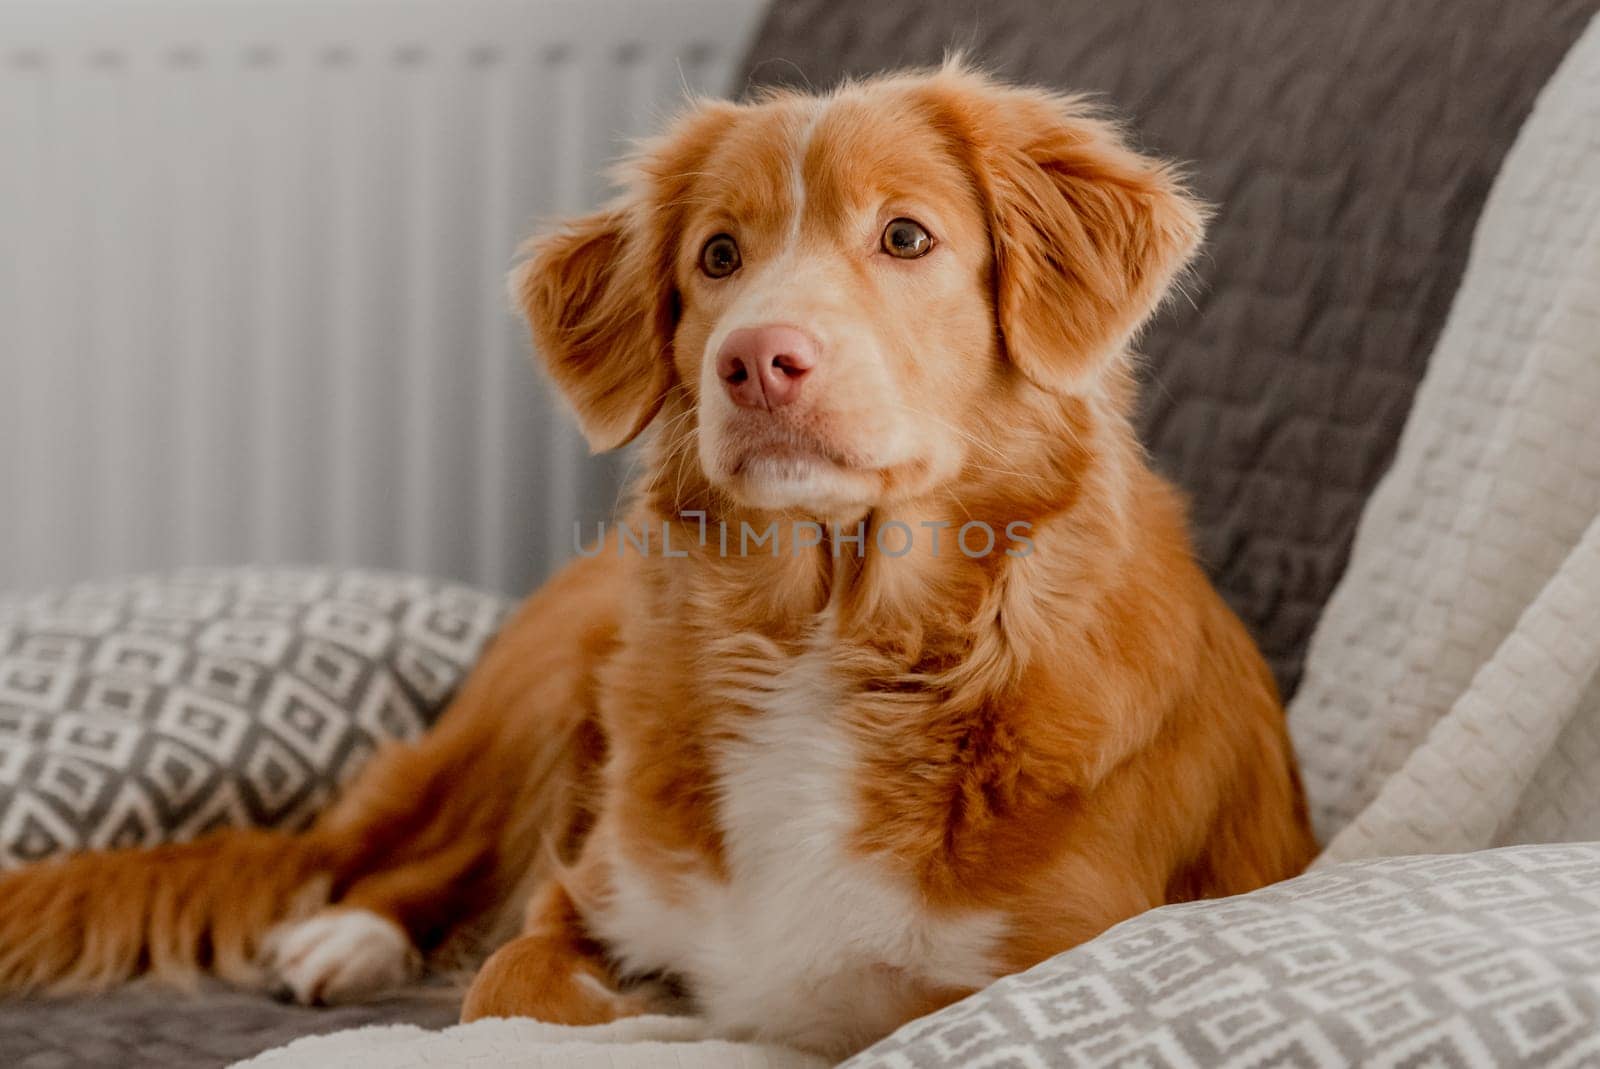 Toller Dog Lies On Couch by tan4ikk1